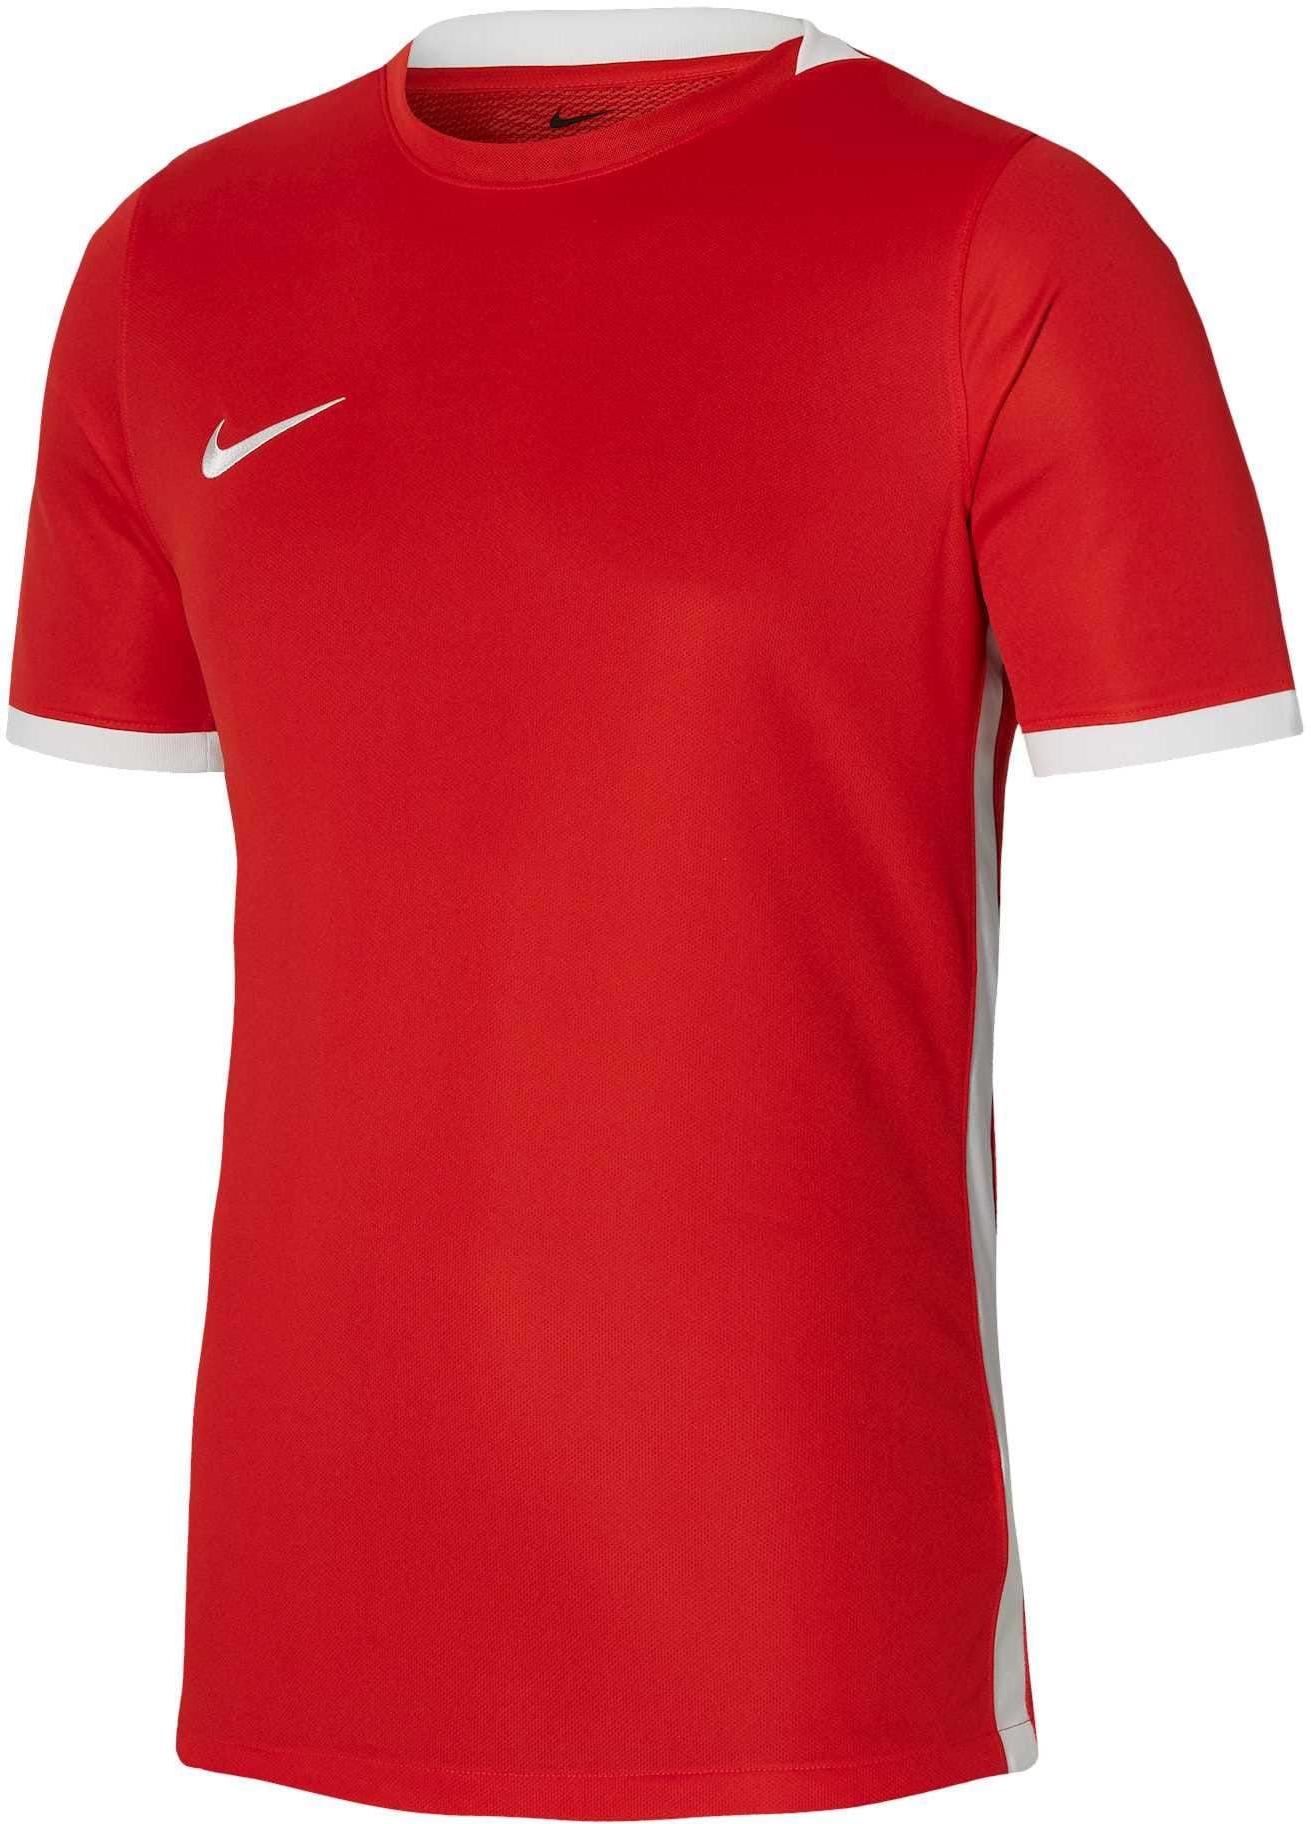 maillot Nike Dri-FIT Challenge 4 Men s Soccer Jersey